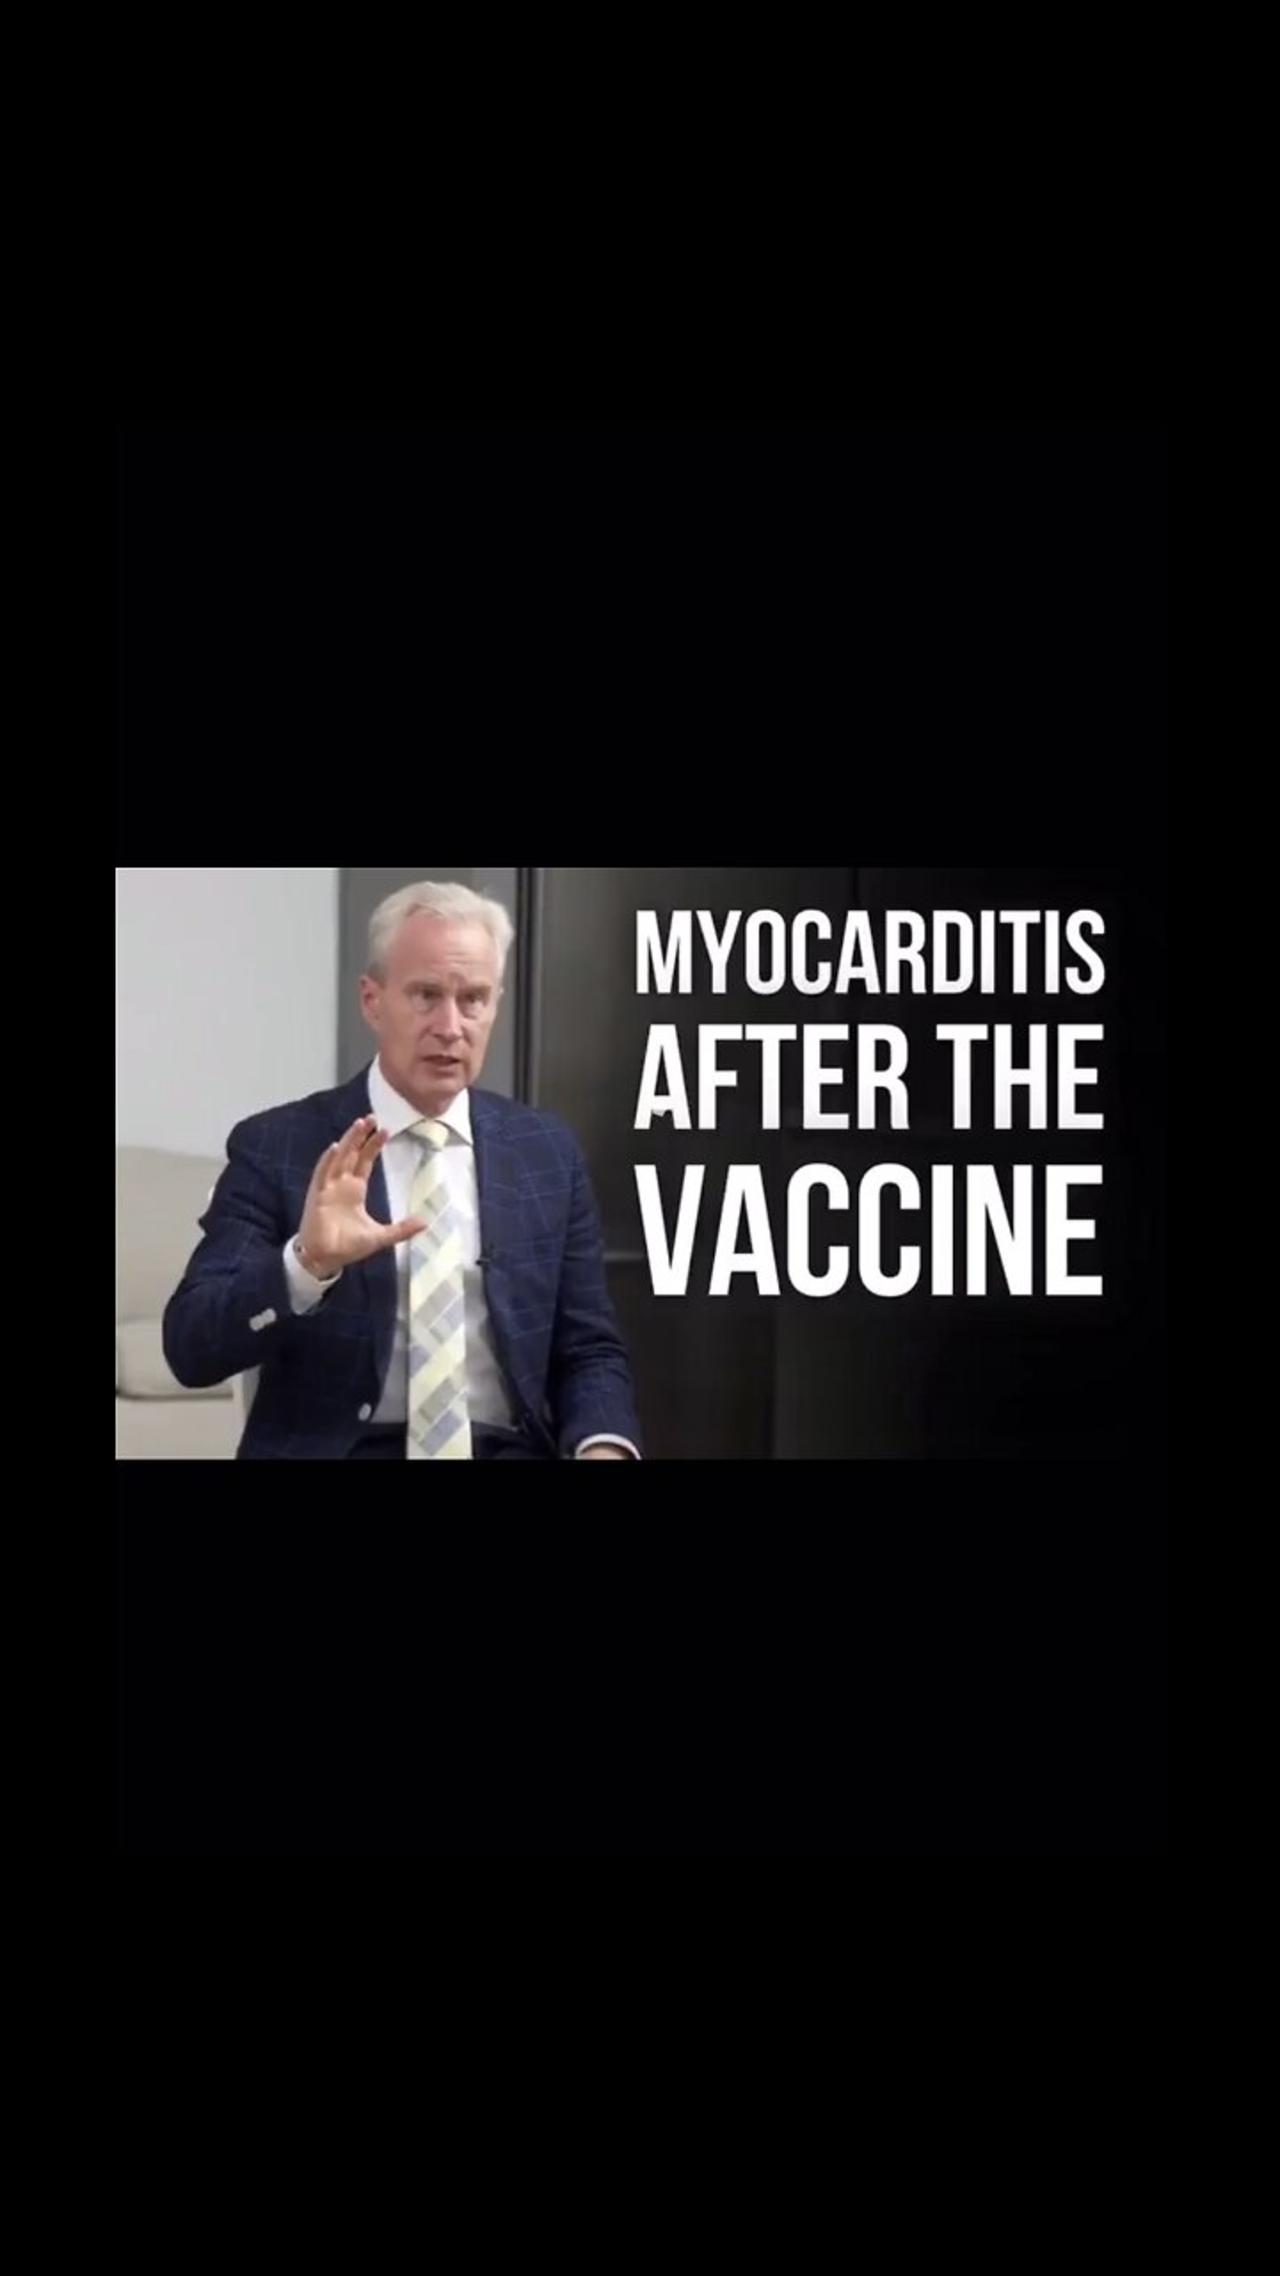 Myocarditis from 4 to 25000/ million after vaccine